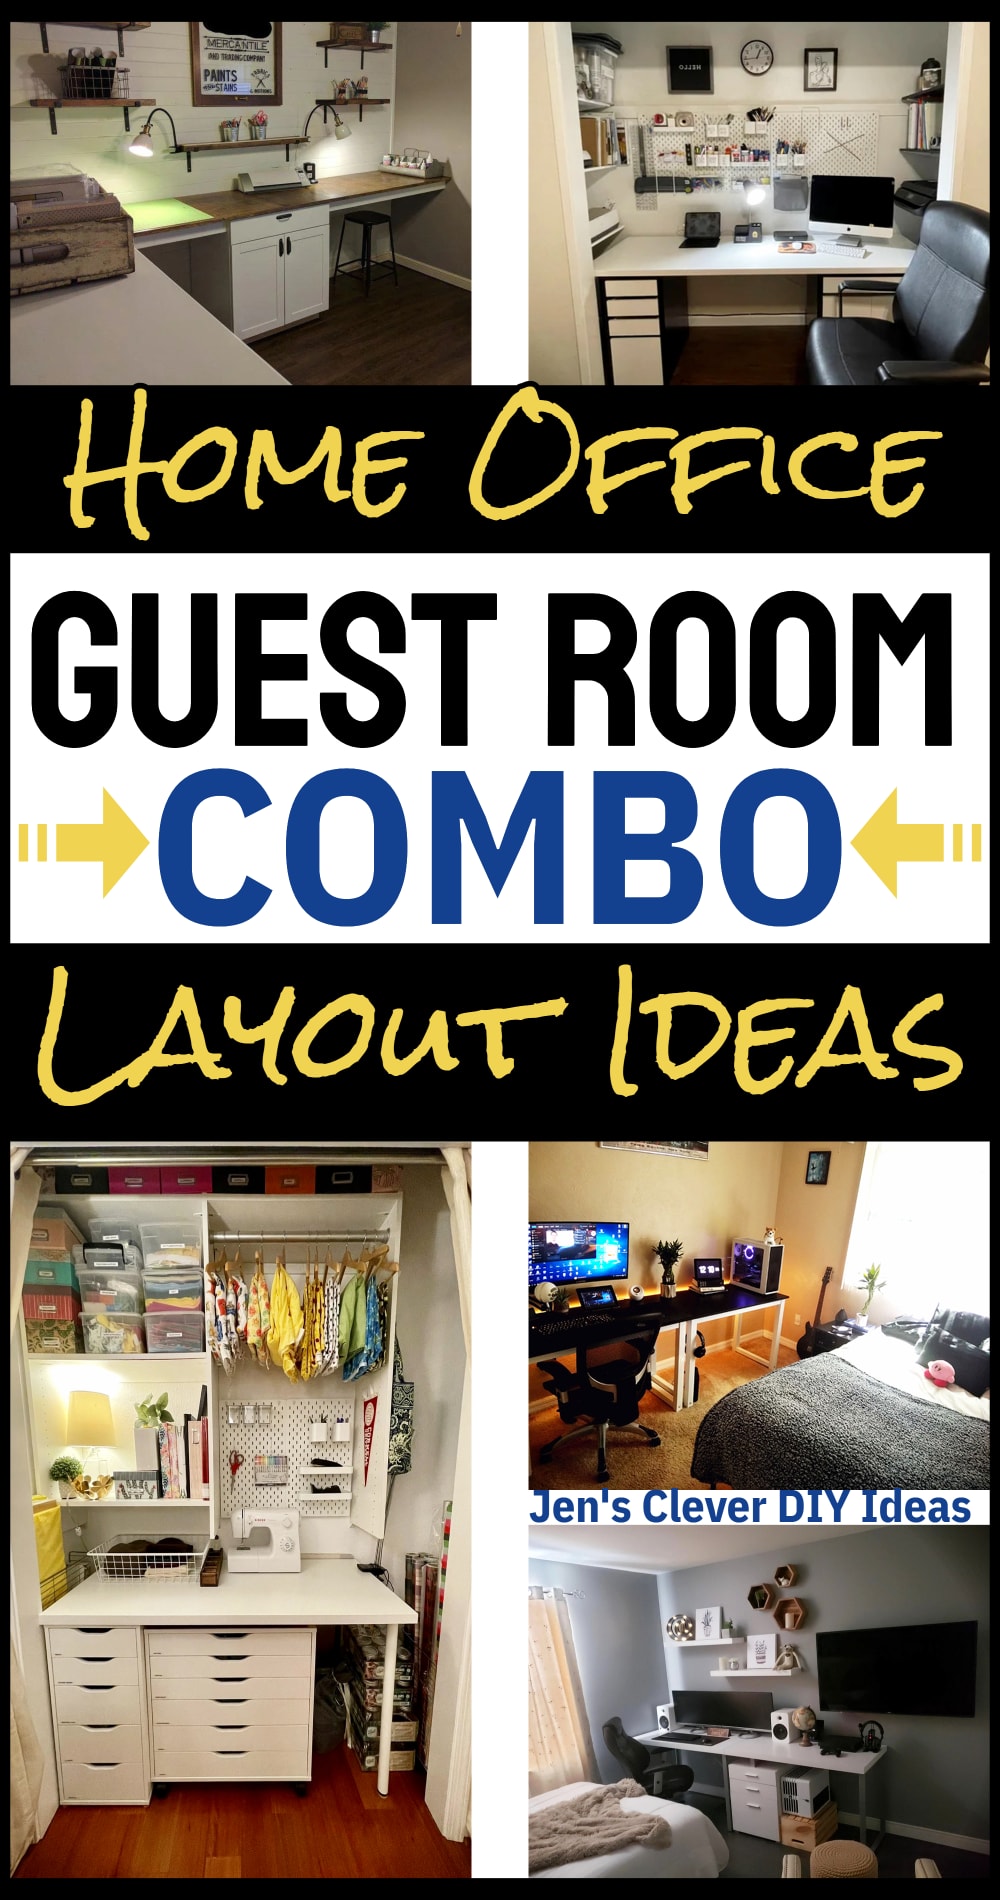 Home office guest room combo layout ideas